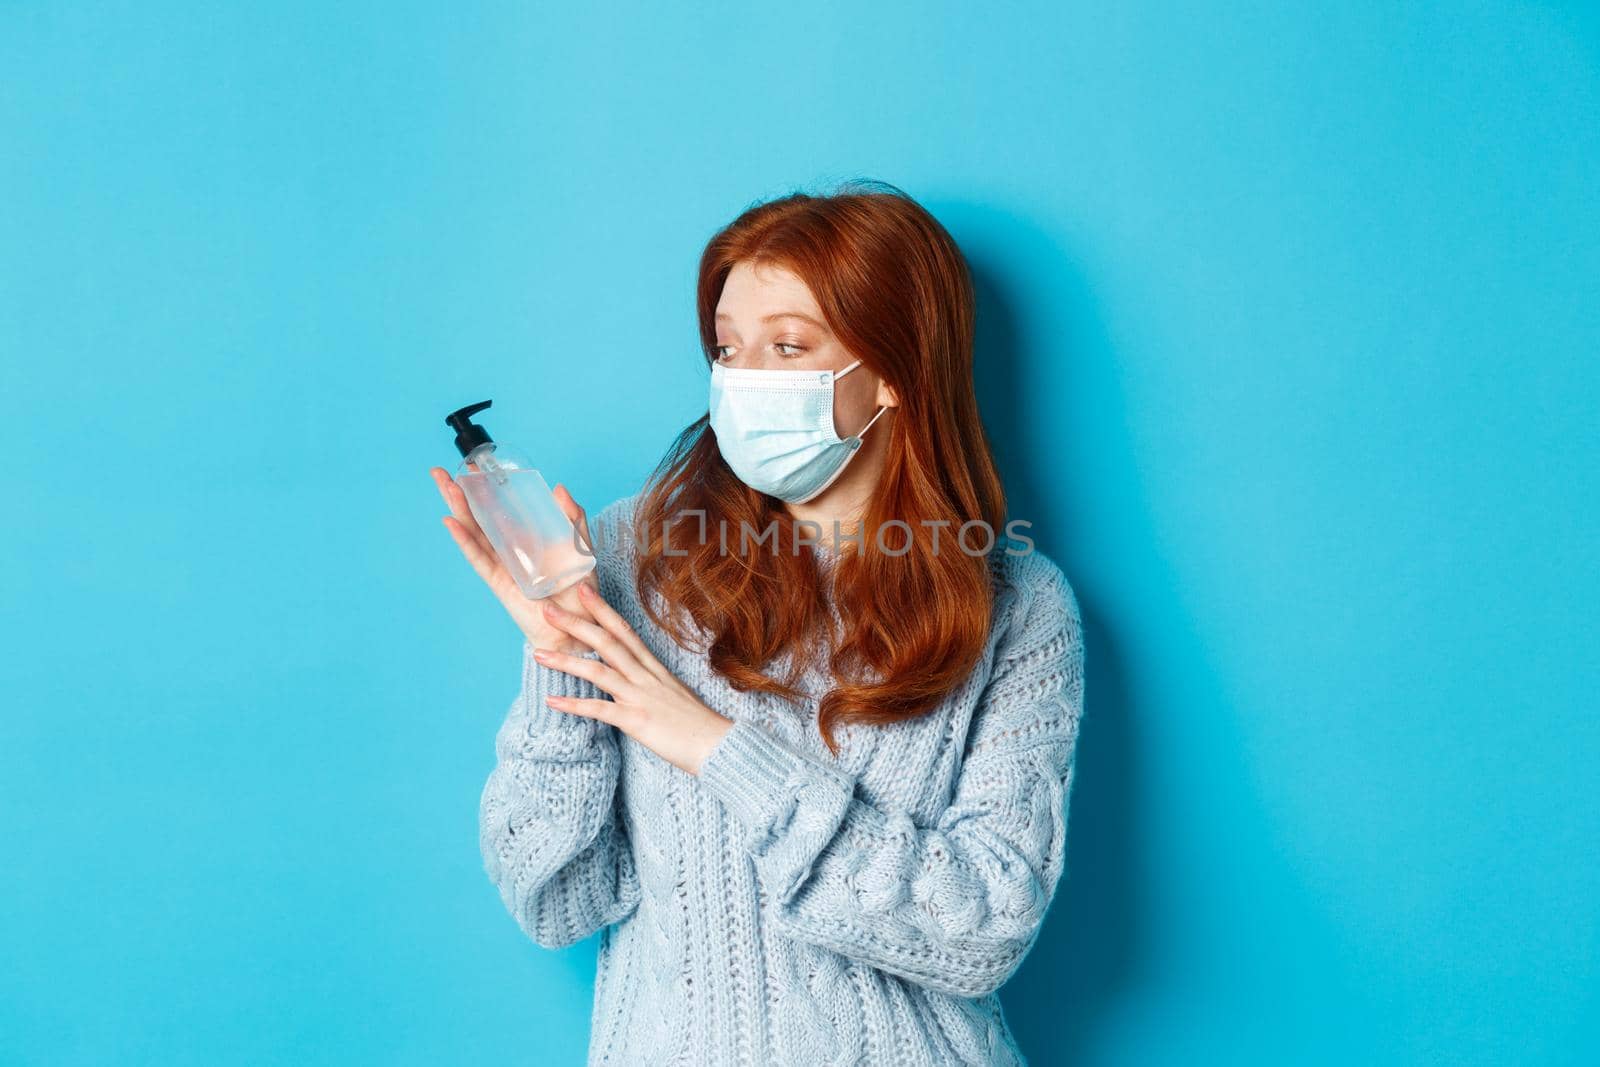 Winter, covid-19 and social distancing concept. Young redhead girl in face mask showing hand sanitizer, demonstrating antiseptic for disinfection, standing over blue background.